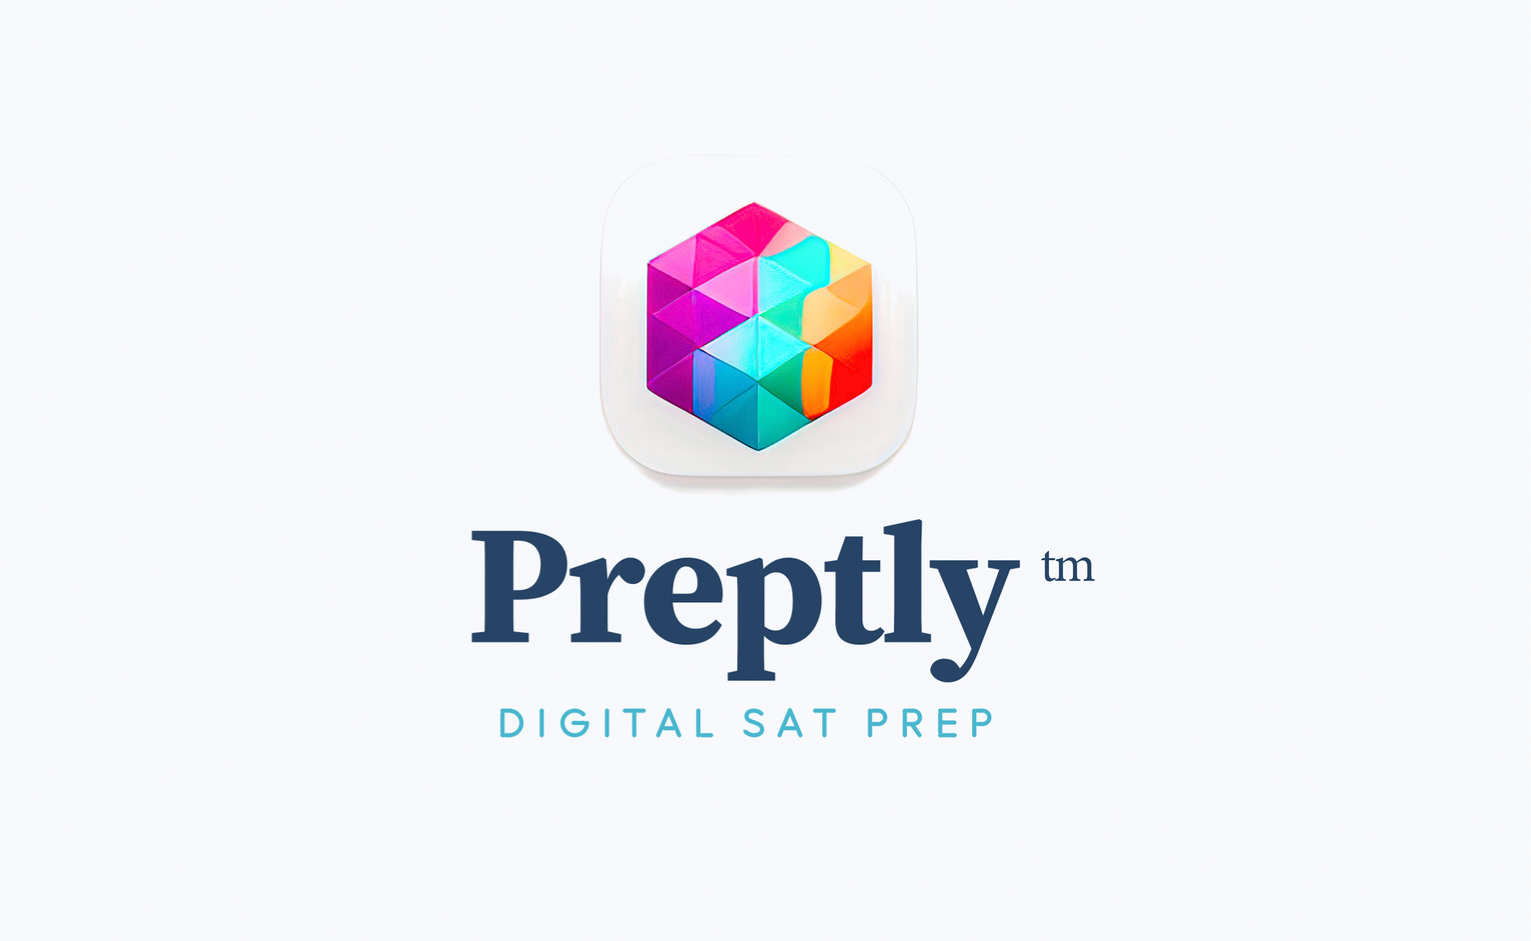 Preptly Launches Engaging Digital SAT Prep App for High School Students